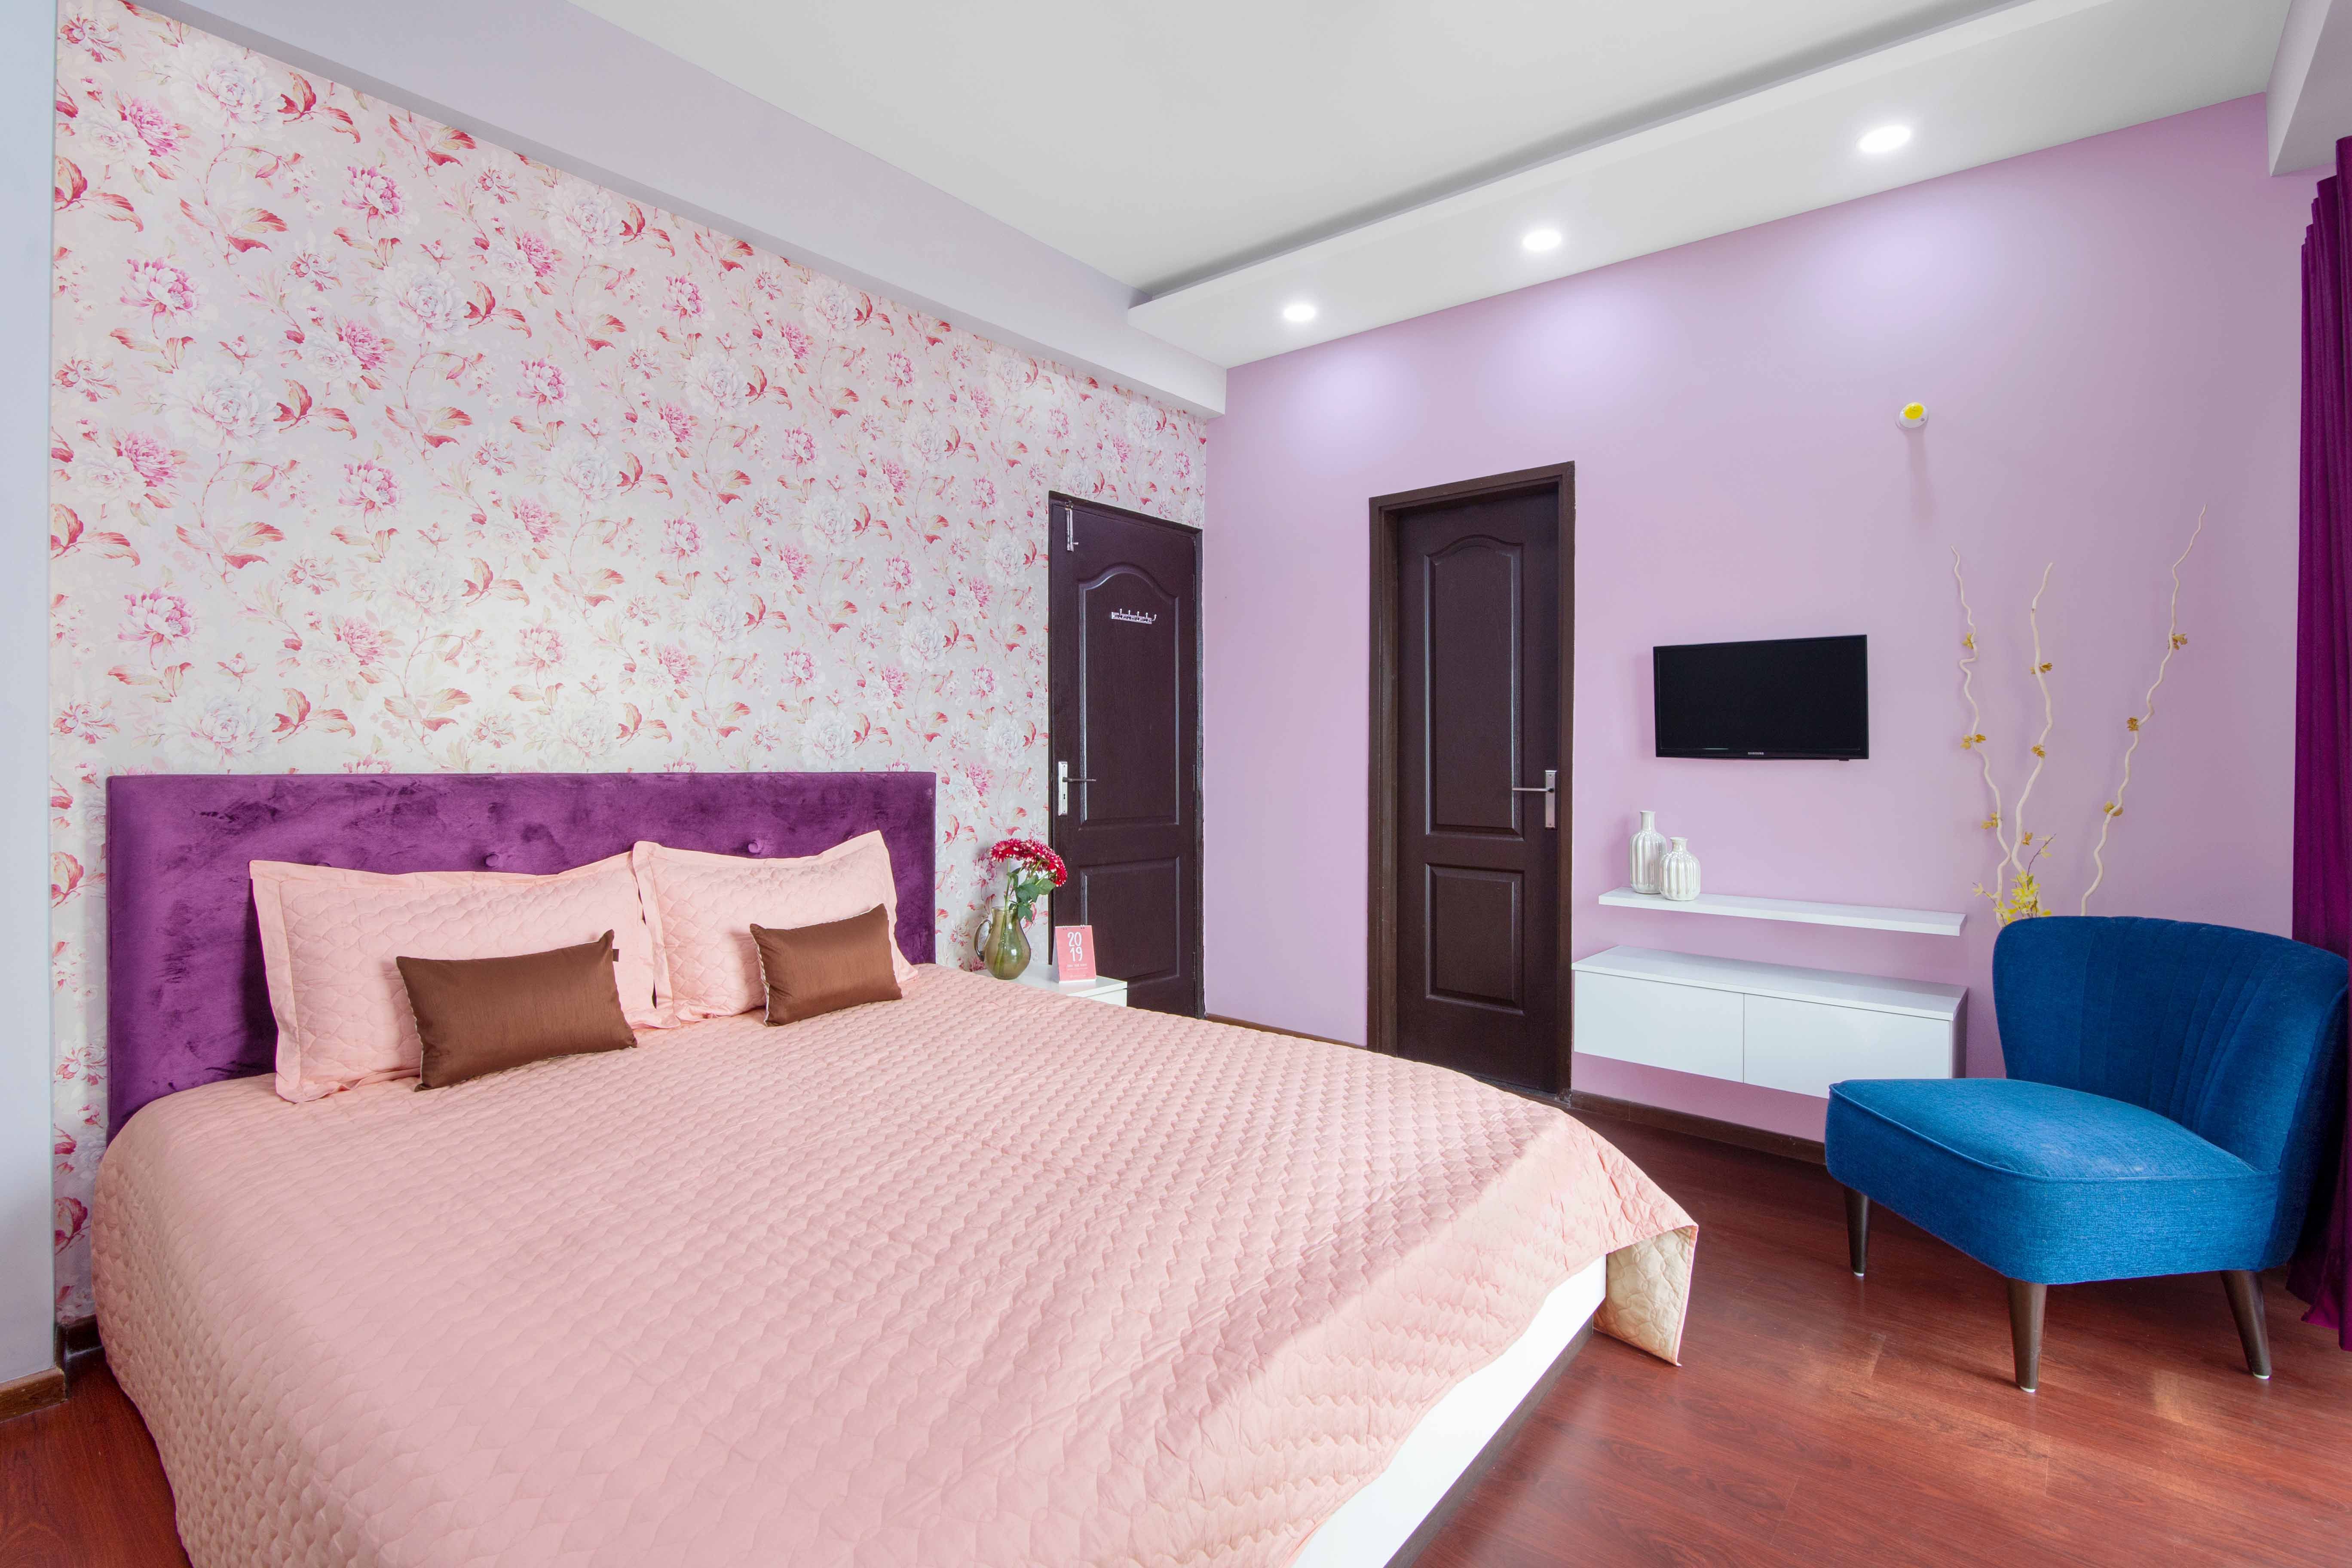 Contemporary Pink And Purple Guest Room Design With Floral Wallpaper